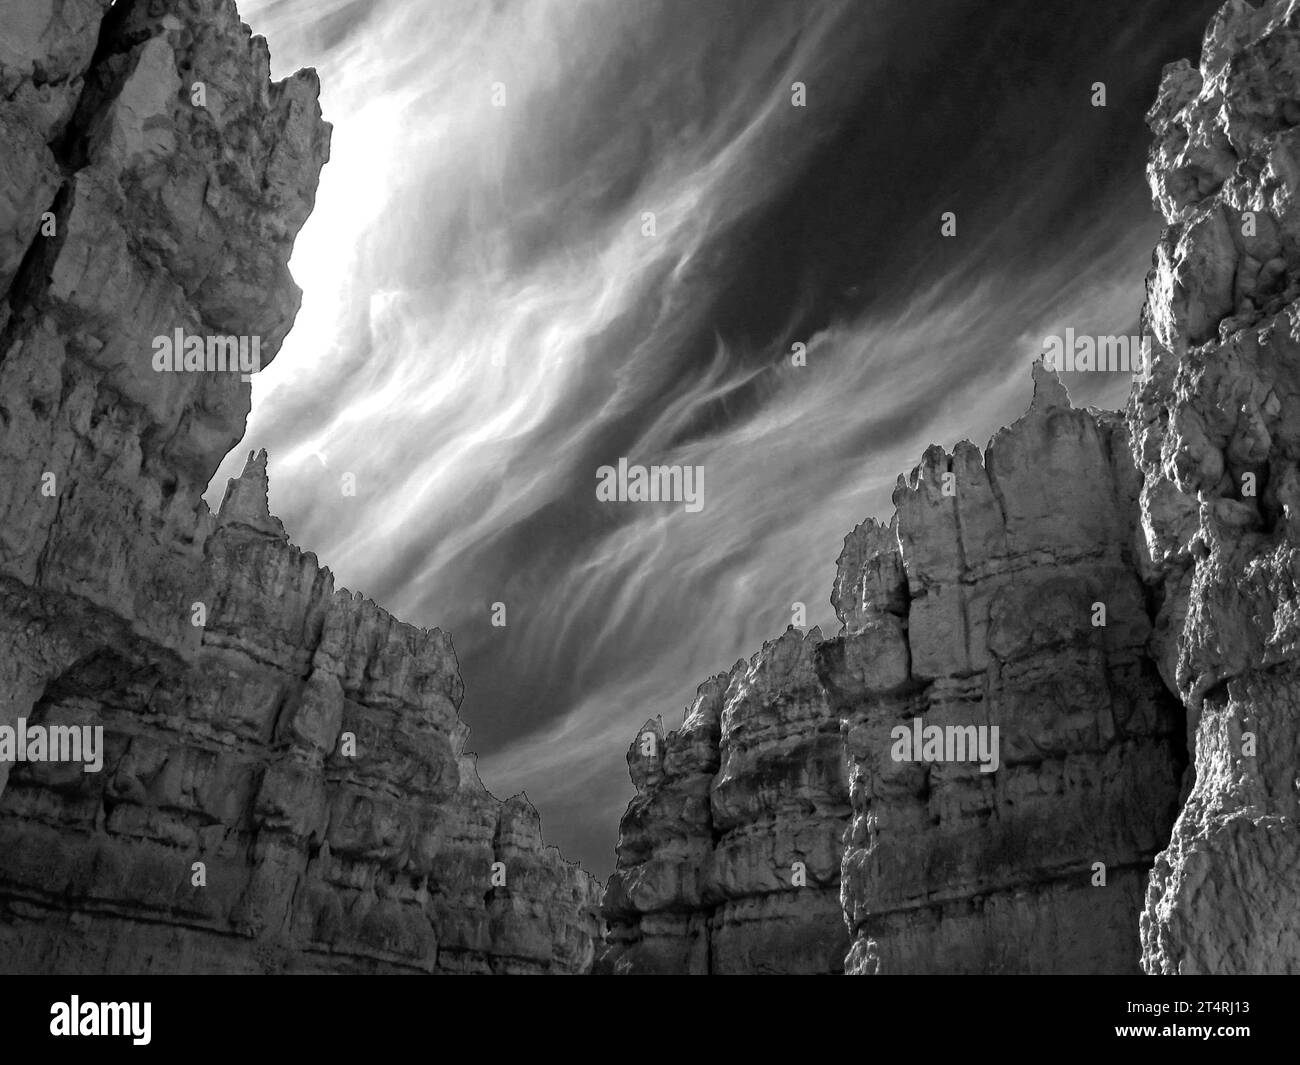 Ominous black and white view of cirrus clouds with the tall limestone cliffs and hoodoos of Bryce Canyon in the foreground. Stock Photo